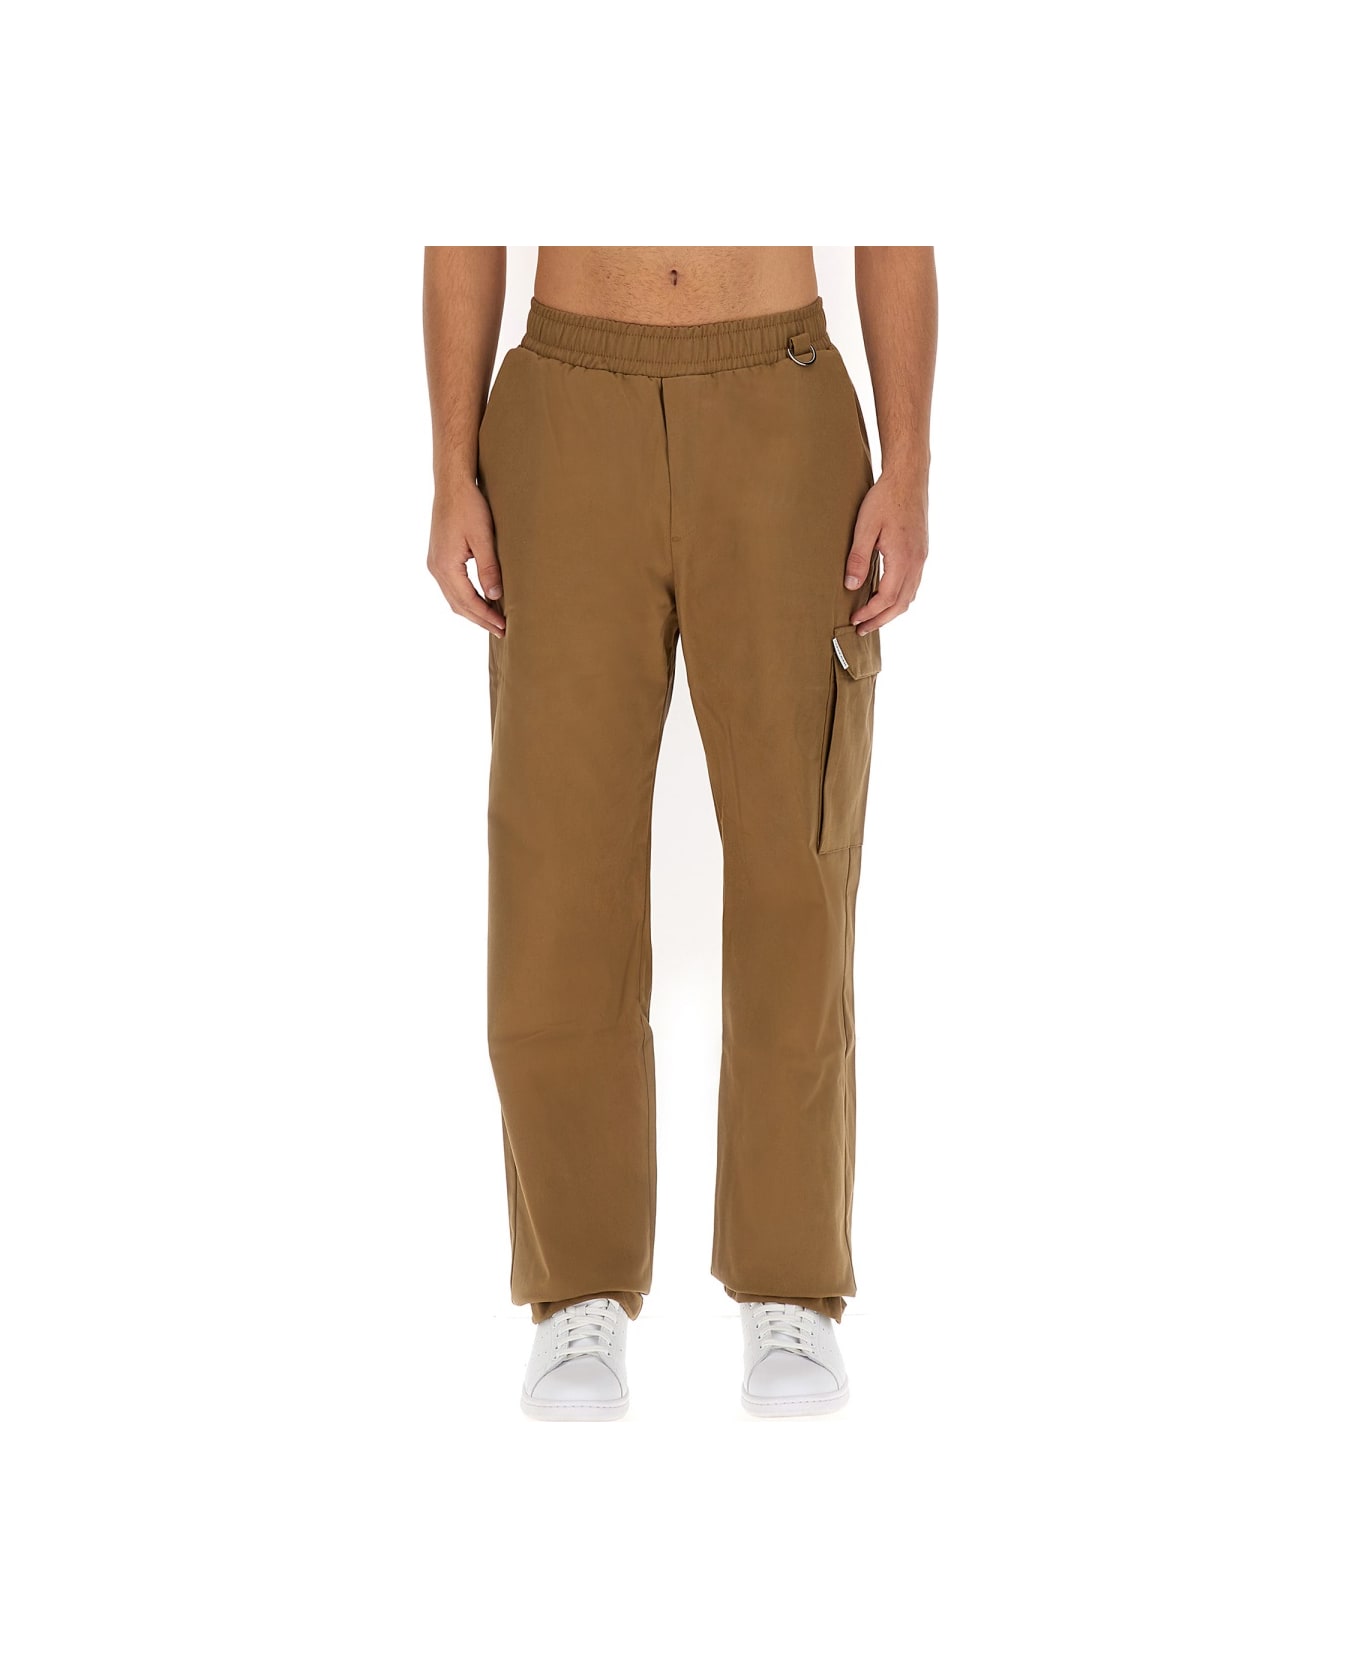 Family First Milano Cargo Pants - BEIGE